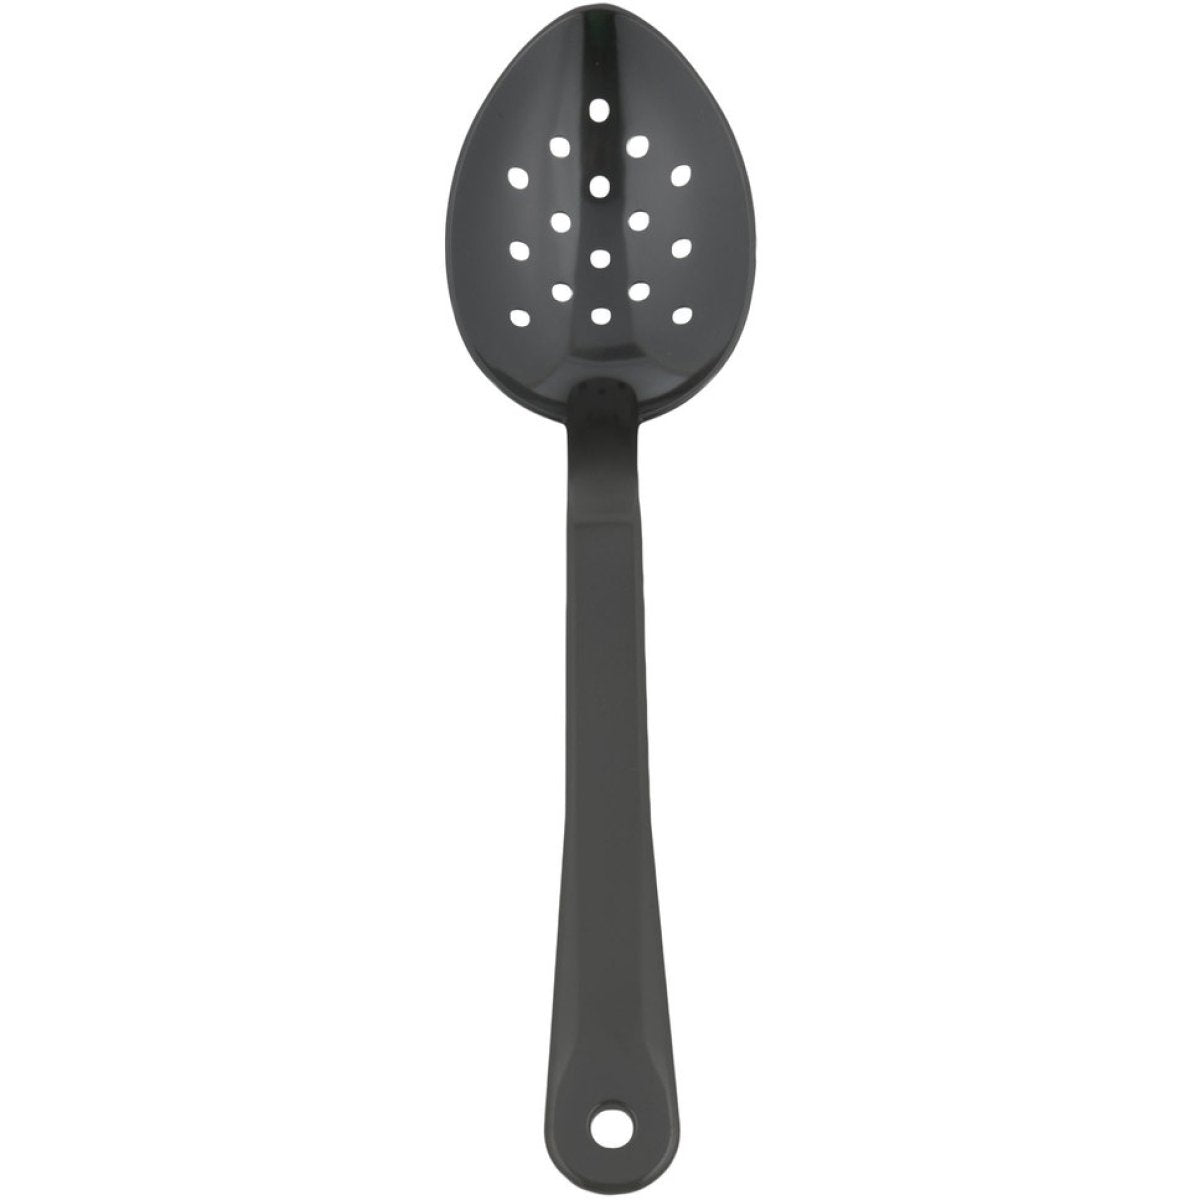 Buffet Catering Perforated Serving Spoon Black Polycarbonate Rental